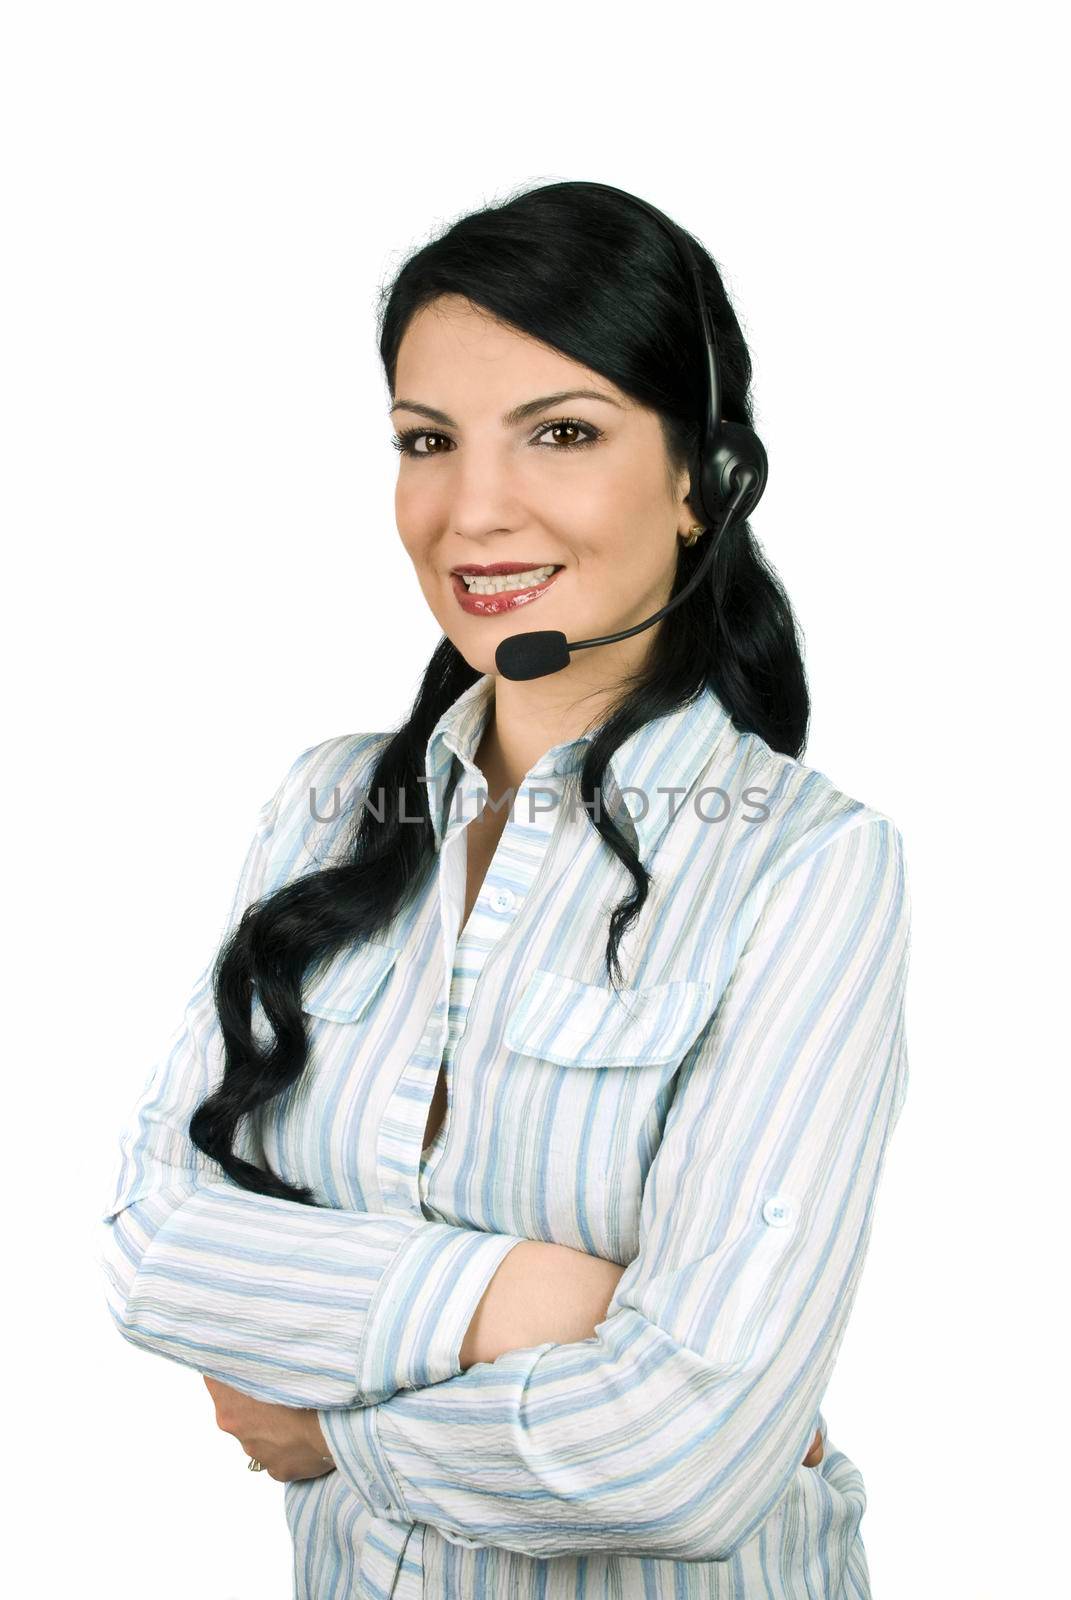 Beautiful woman operator working in a Call Center standing with hands crossed and smiling